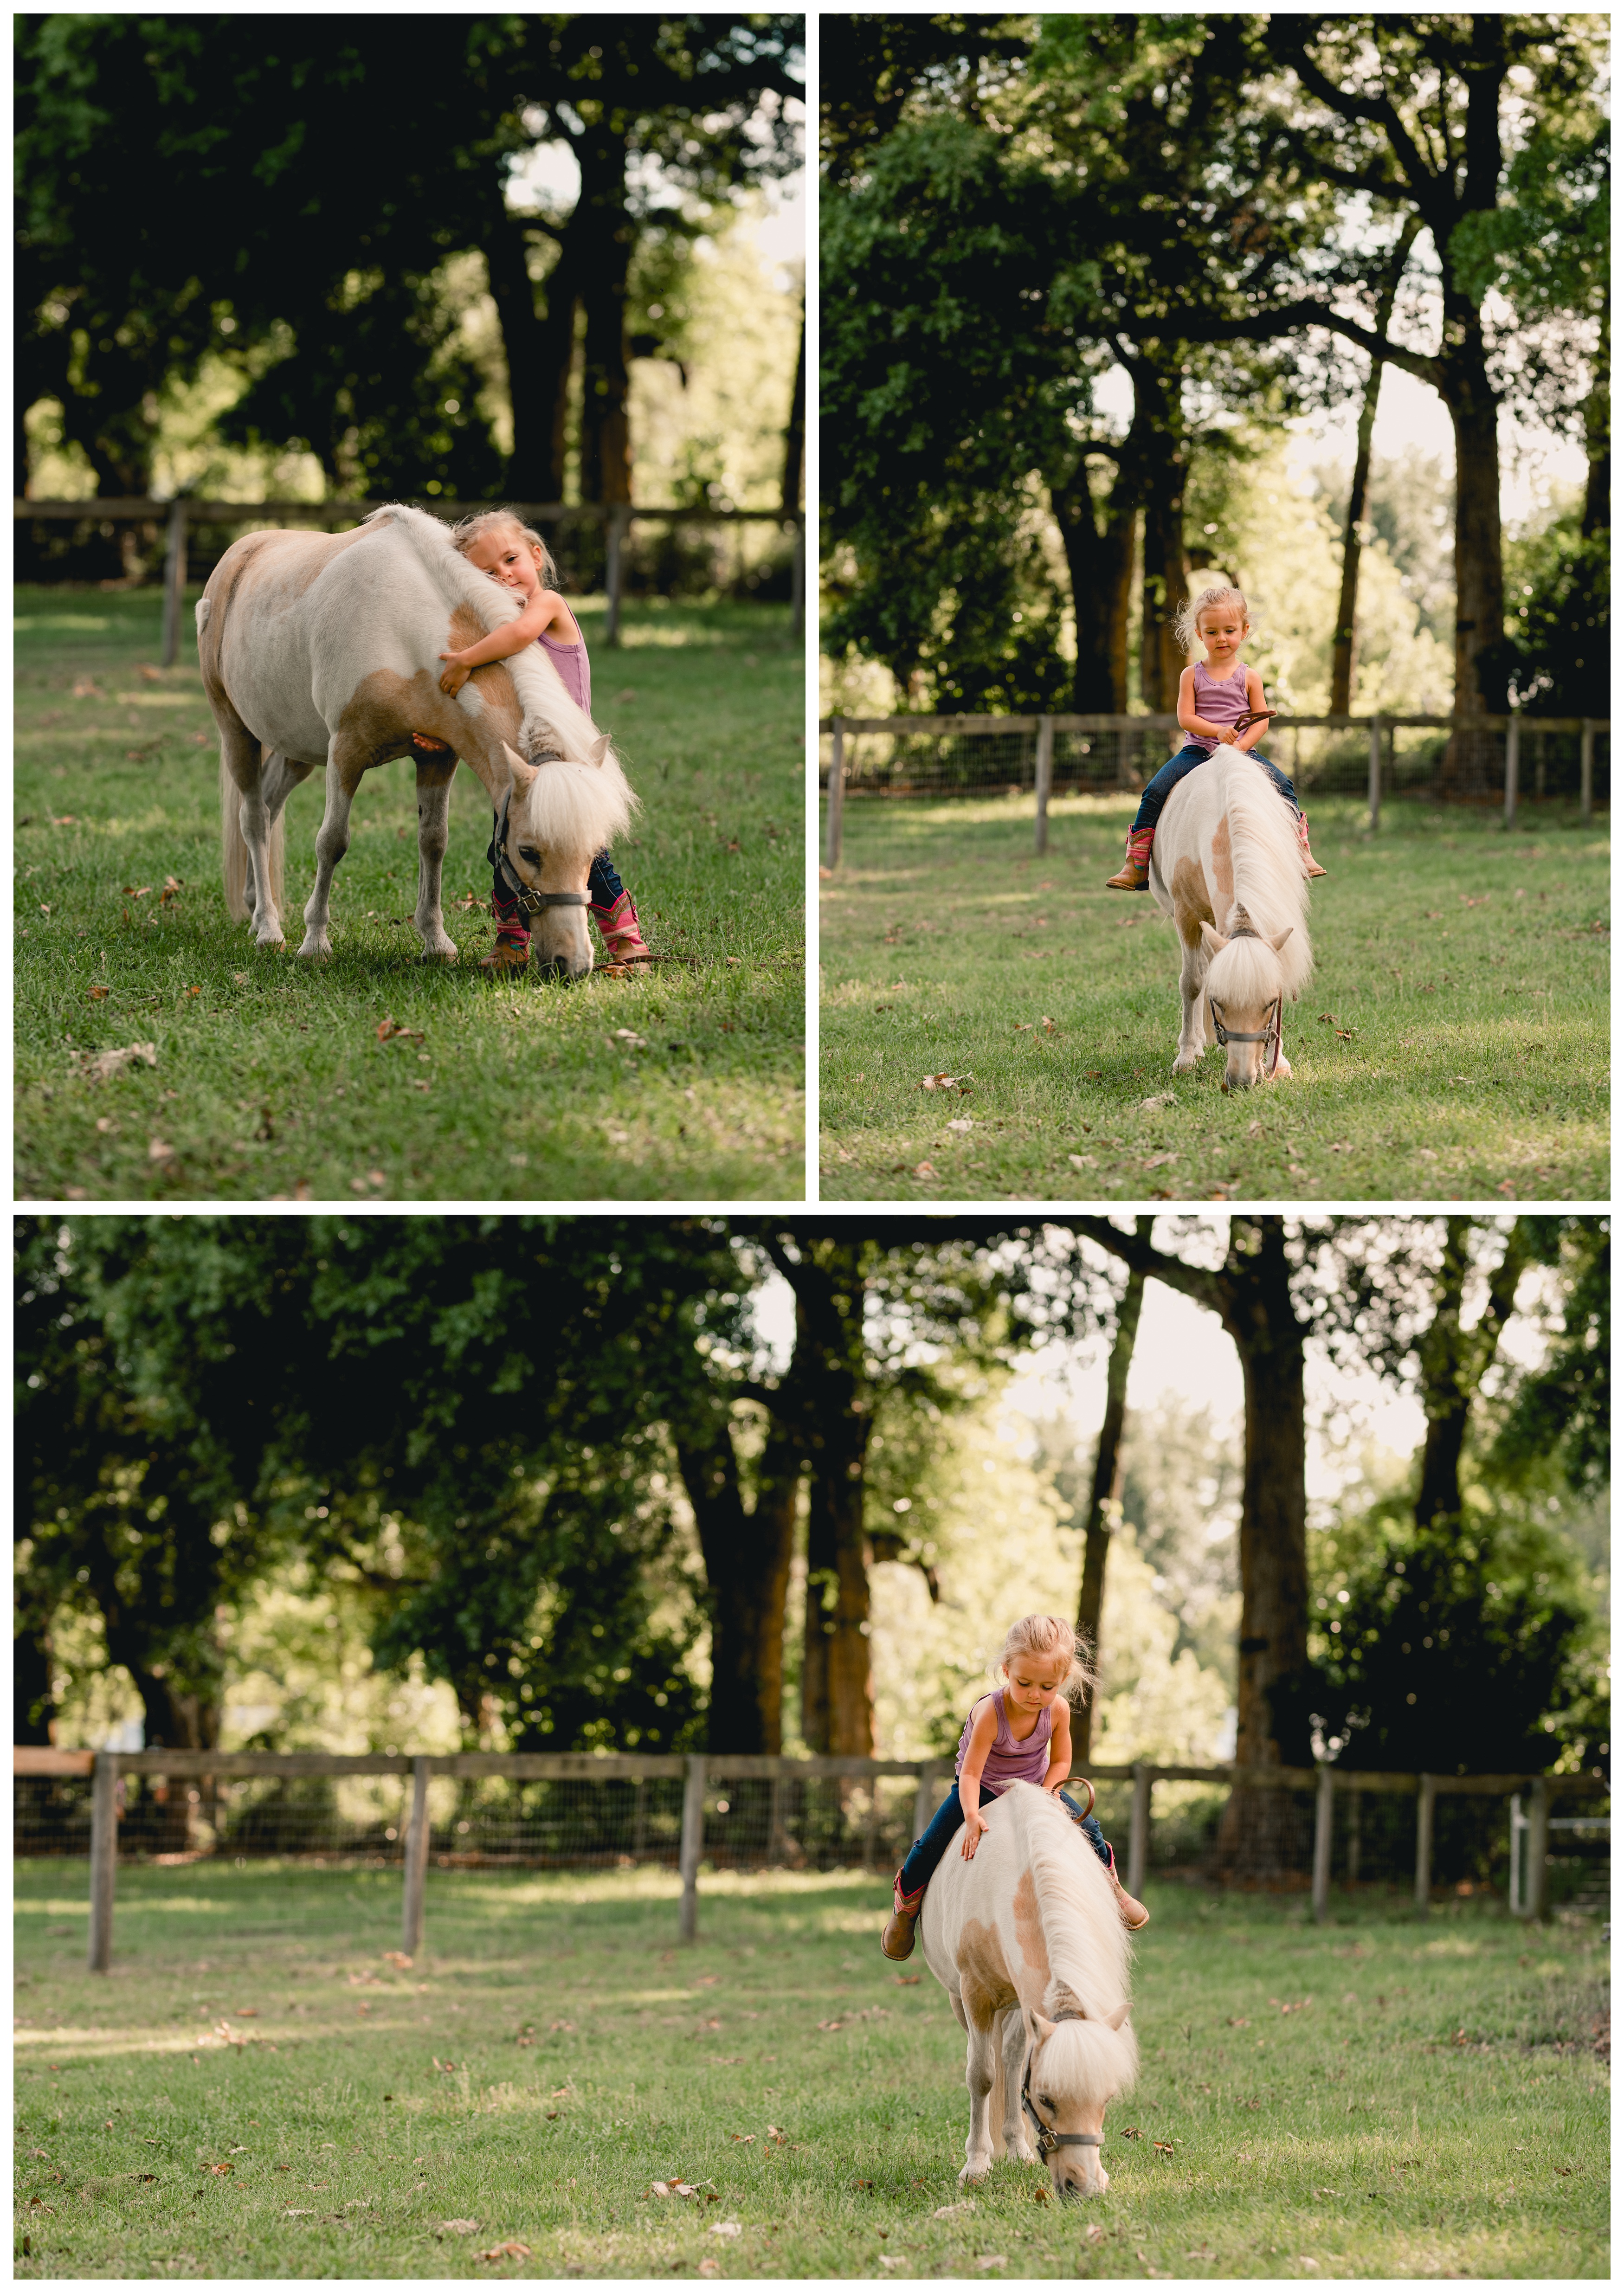 Photographer who specializes in horse and rider photo sessions in the North Florida area. Shelly Williams Photography